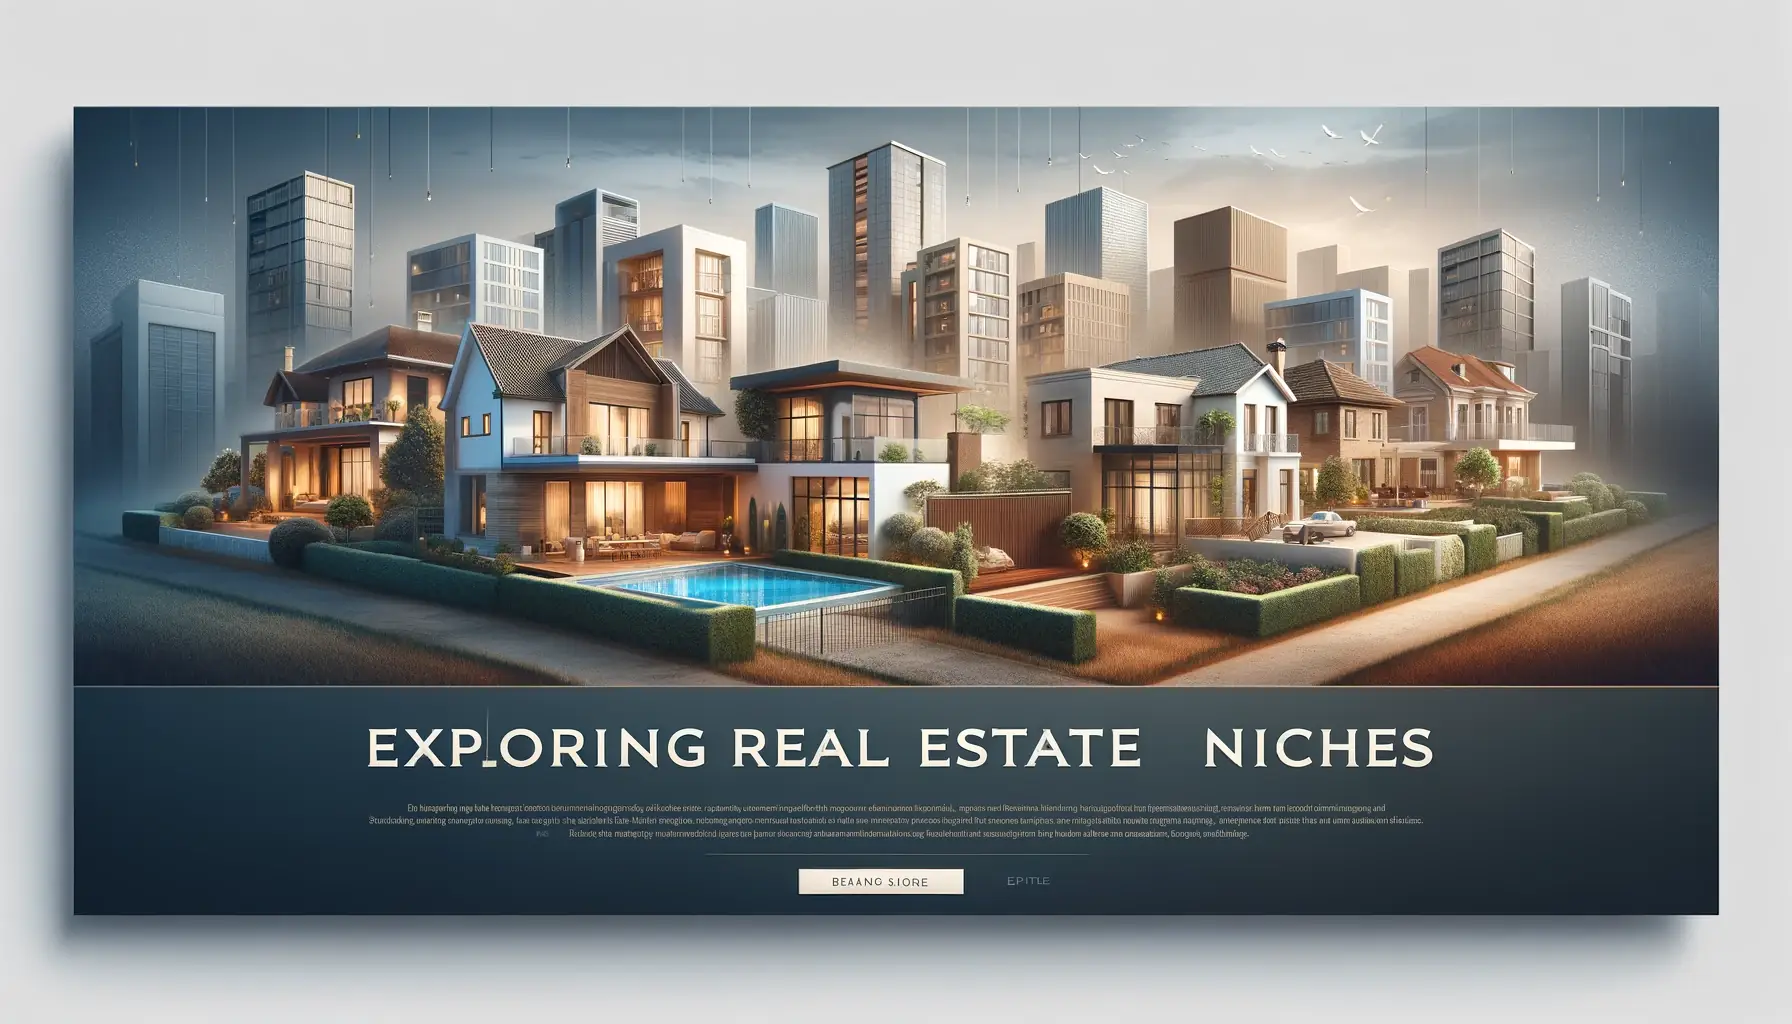 Real estate niches